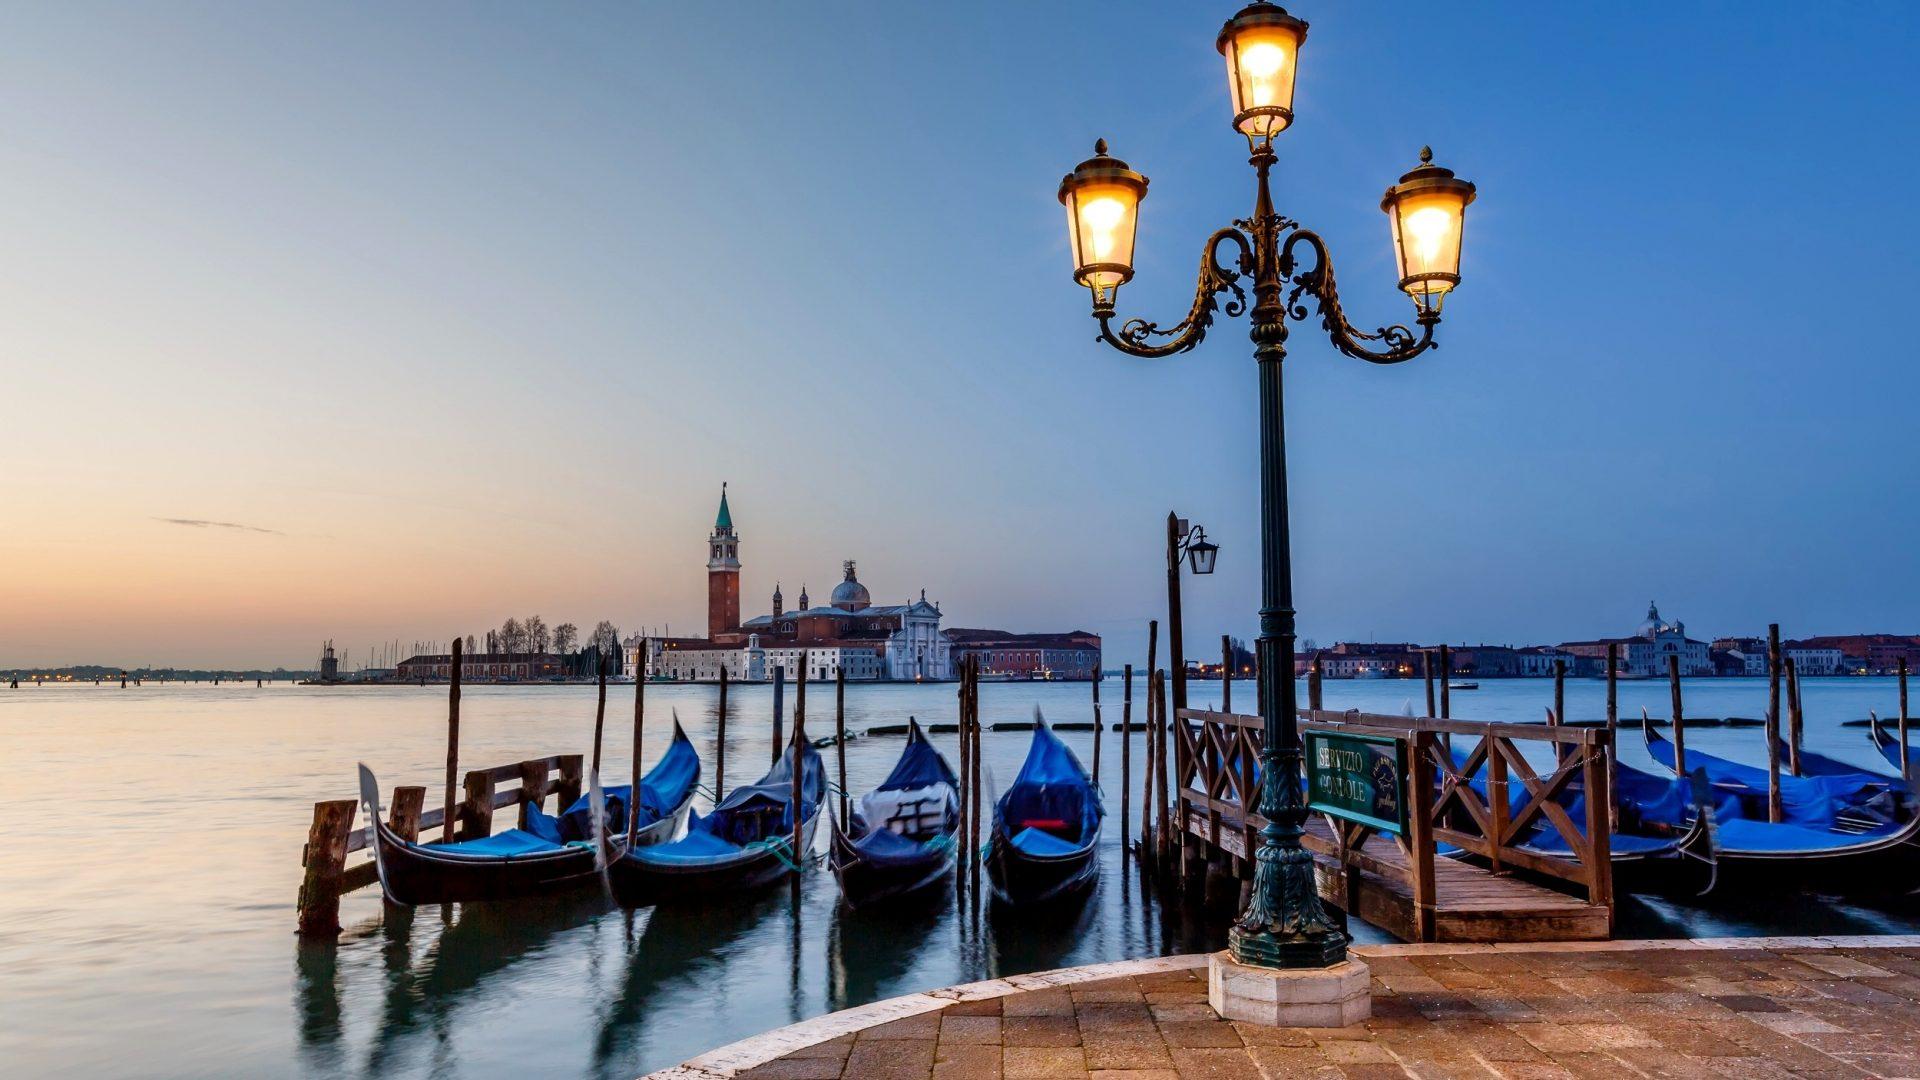 Gondolas Tag wallpaper: Lovely View Sea Venice Beauty Canal Nature